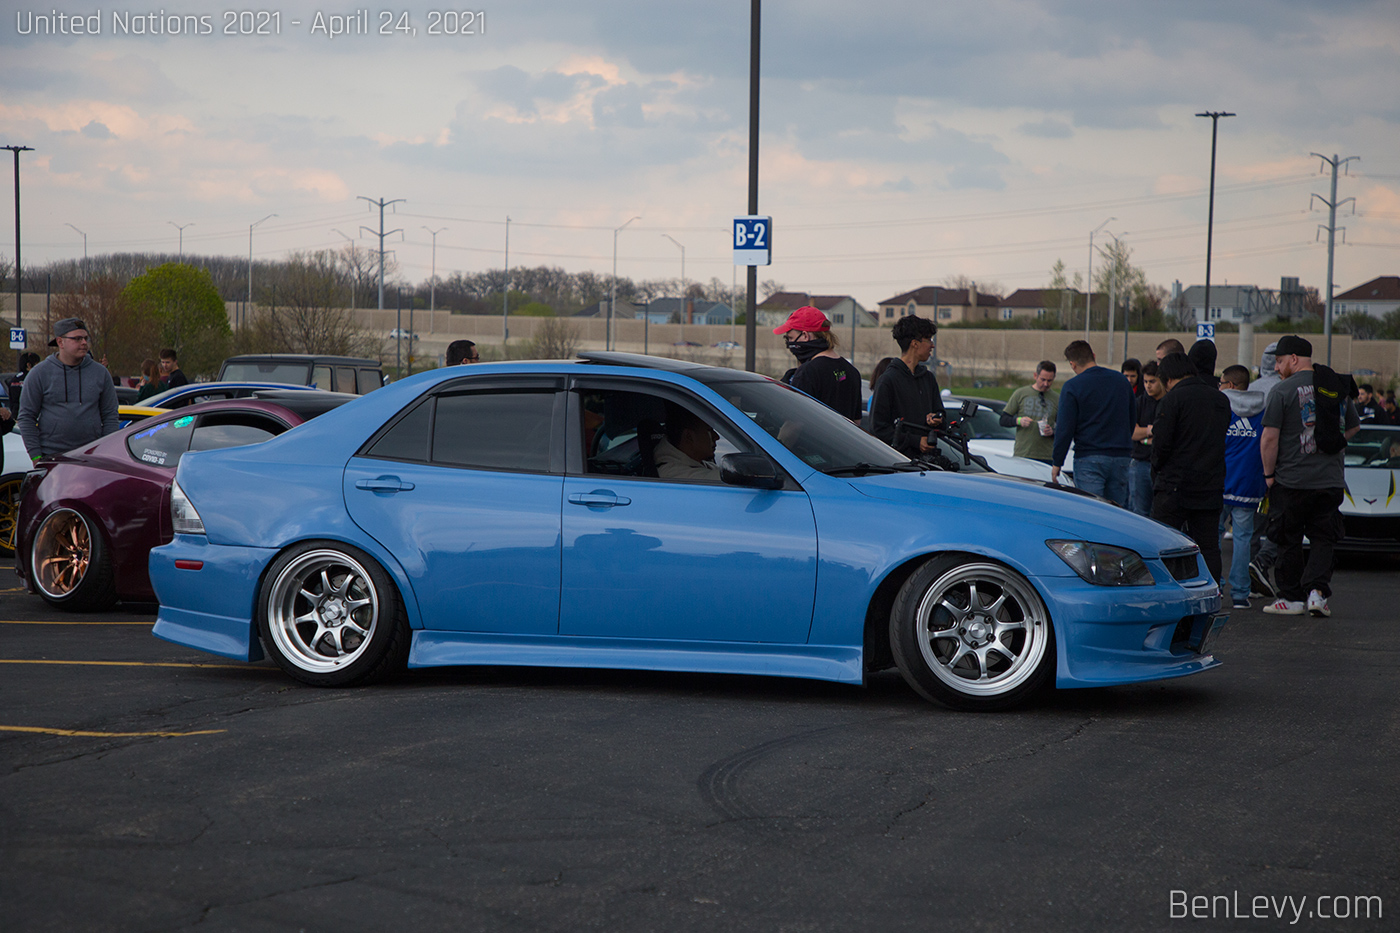 Blue Lexus IS300 at United Nations Car Show